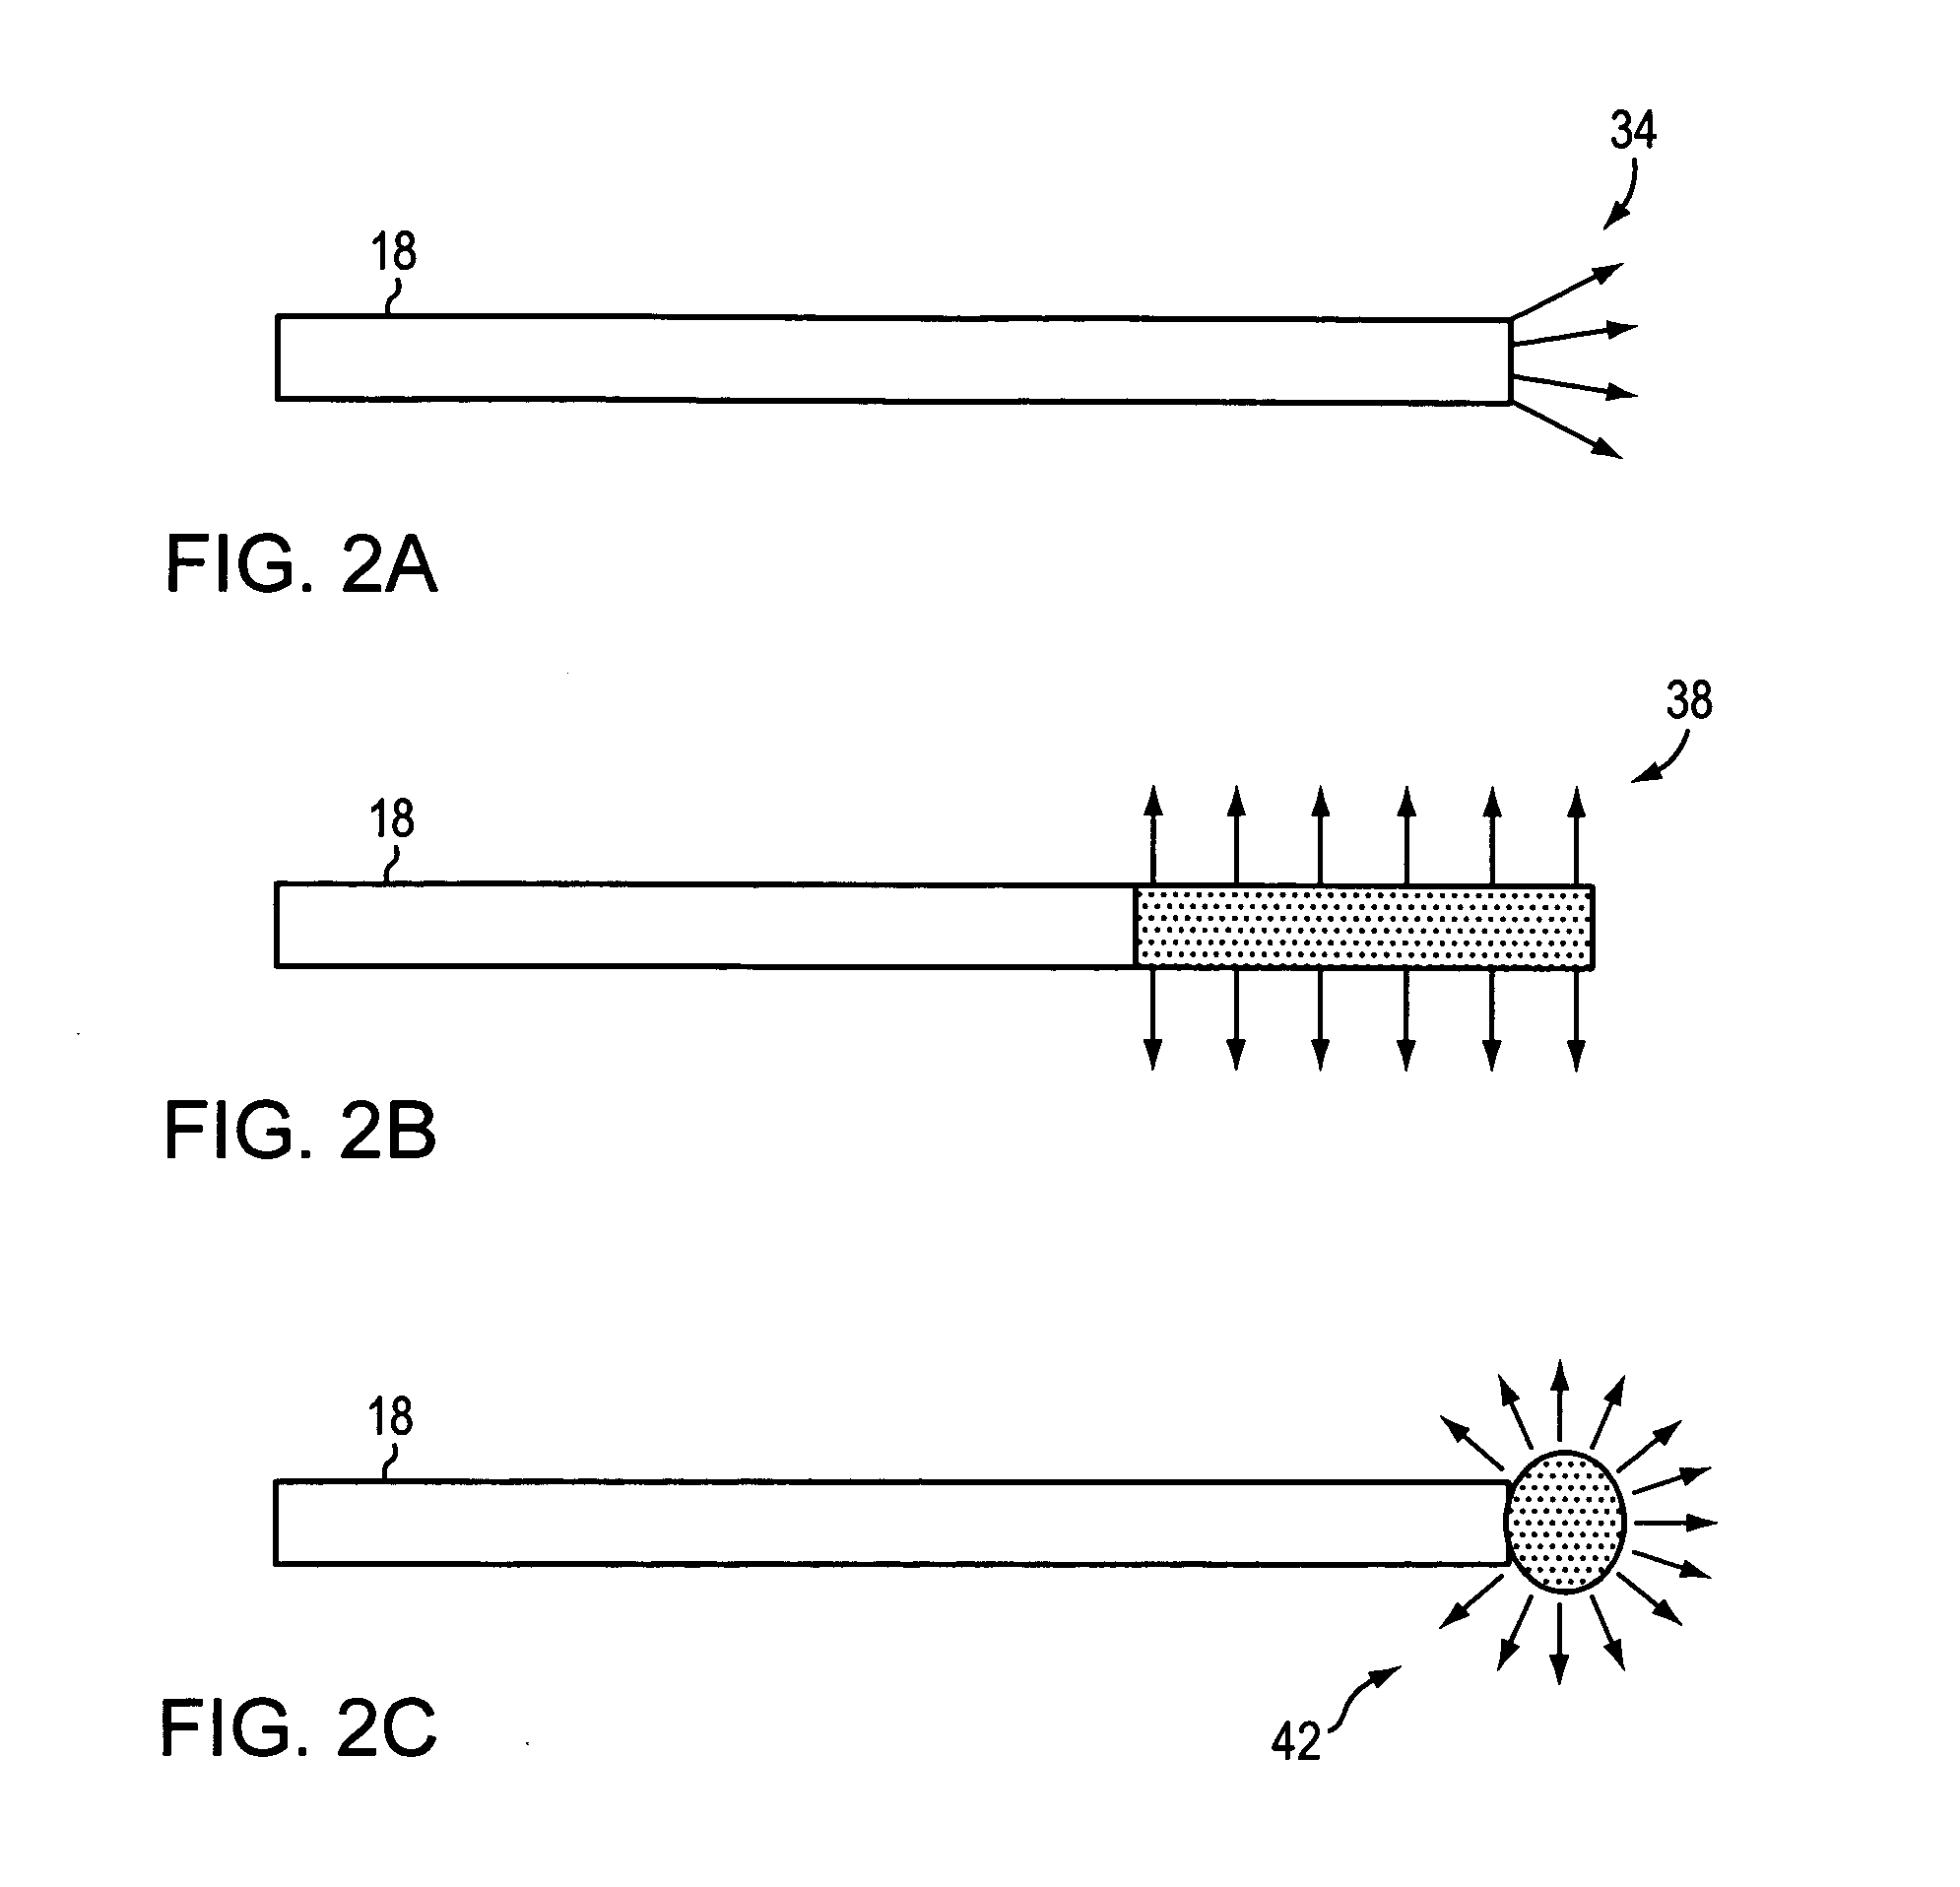 Endovascular treatment of a blood vessel using a light source